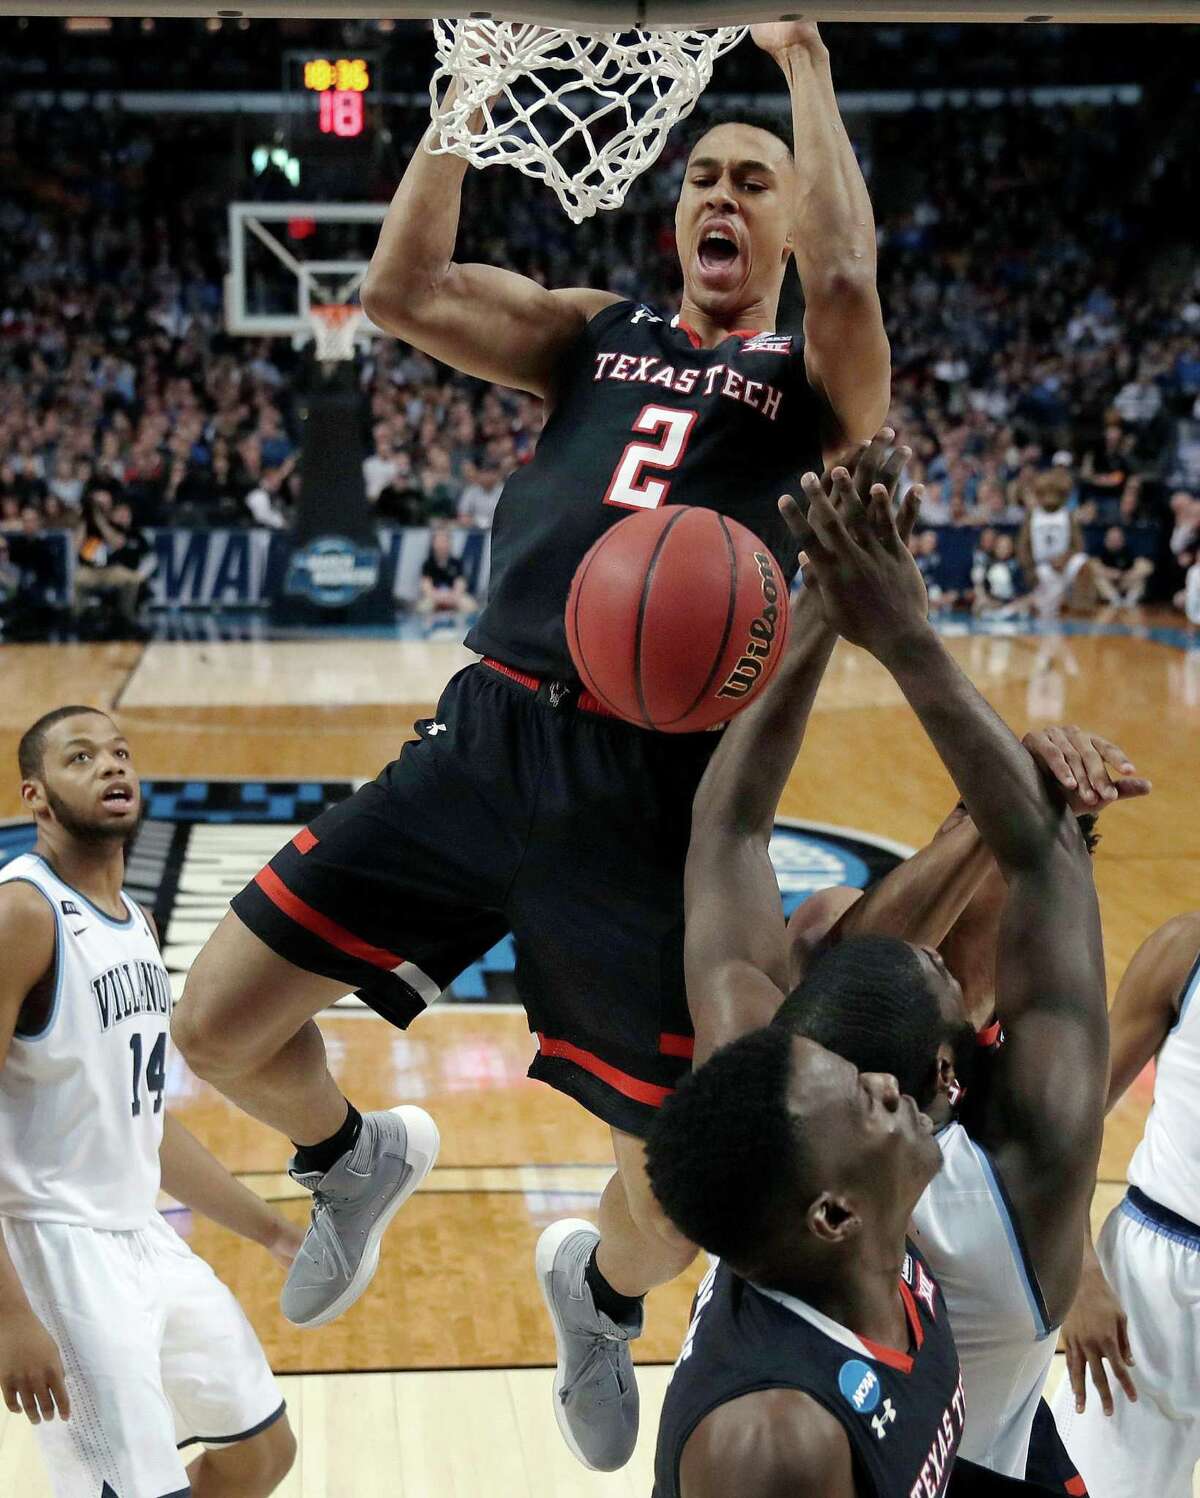 FILE - In this March 25, 2018, file photo, Texas Tech's Zhaire Smith, top, dunks against Villanova during the second half of an NCAA men's college basketball tournament regional final in Boston. Texas Tech standout freshman guard Smith says he is signing with an agent and will be available in the NBA draft. Smith said in a Twitter post that he is signing with Roc Nation and forgoing the rest of his collegiate career. (AP Photo/Charles Krupa, File)